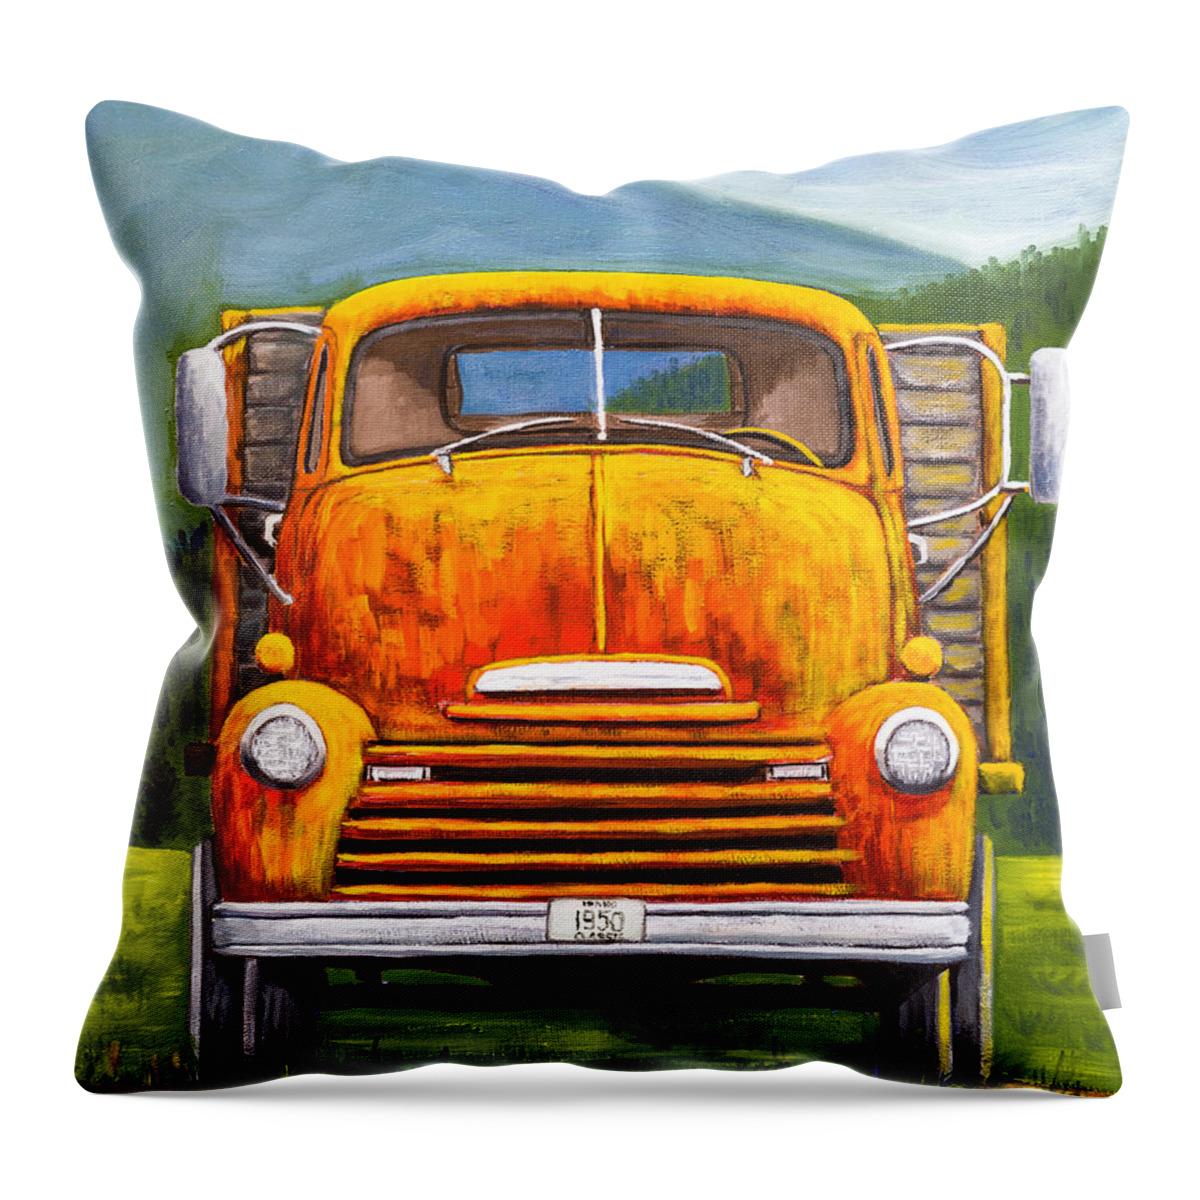 Cabover Truck Throw Pillow featuring the painting Cabover Truck by Kevin Hughes